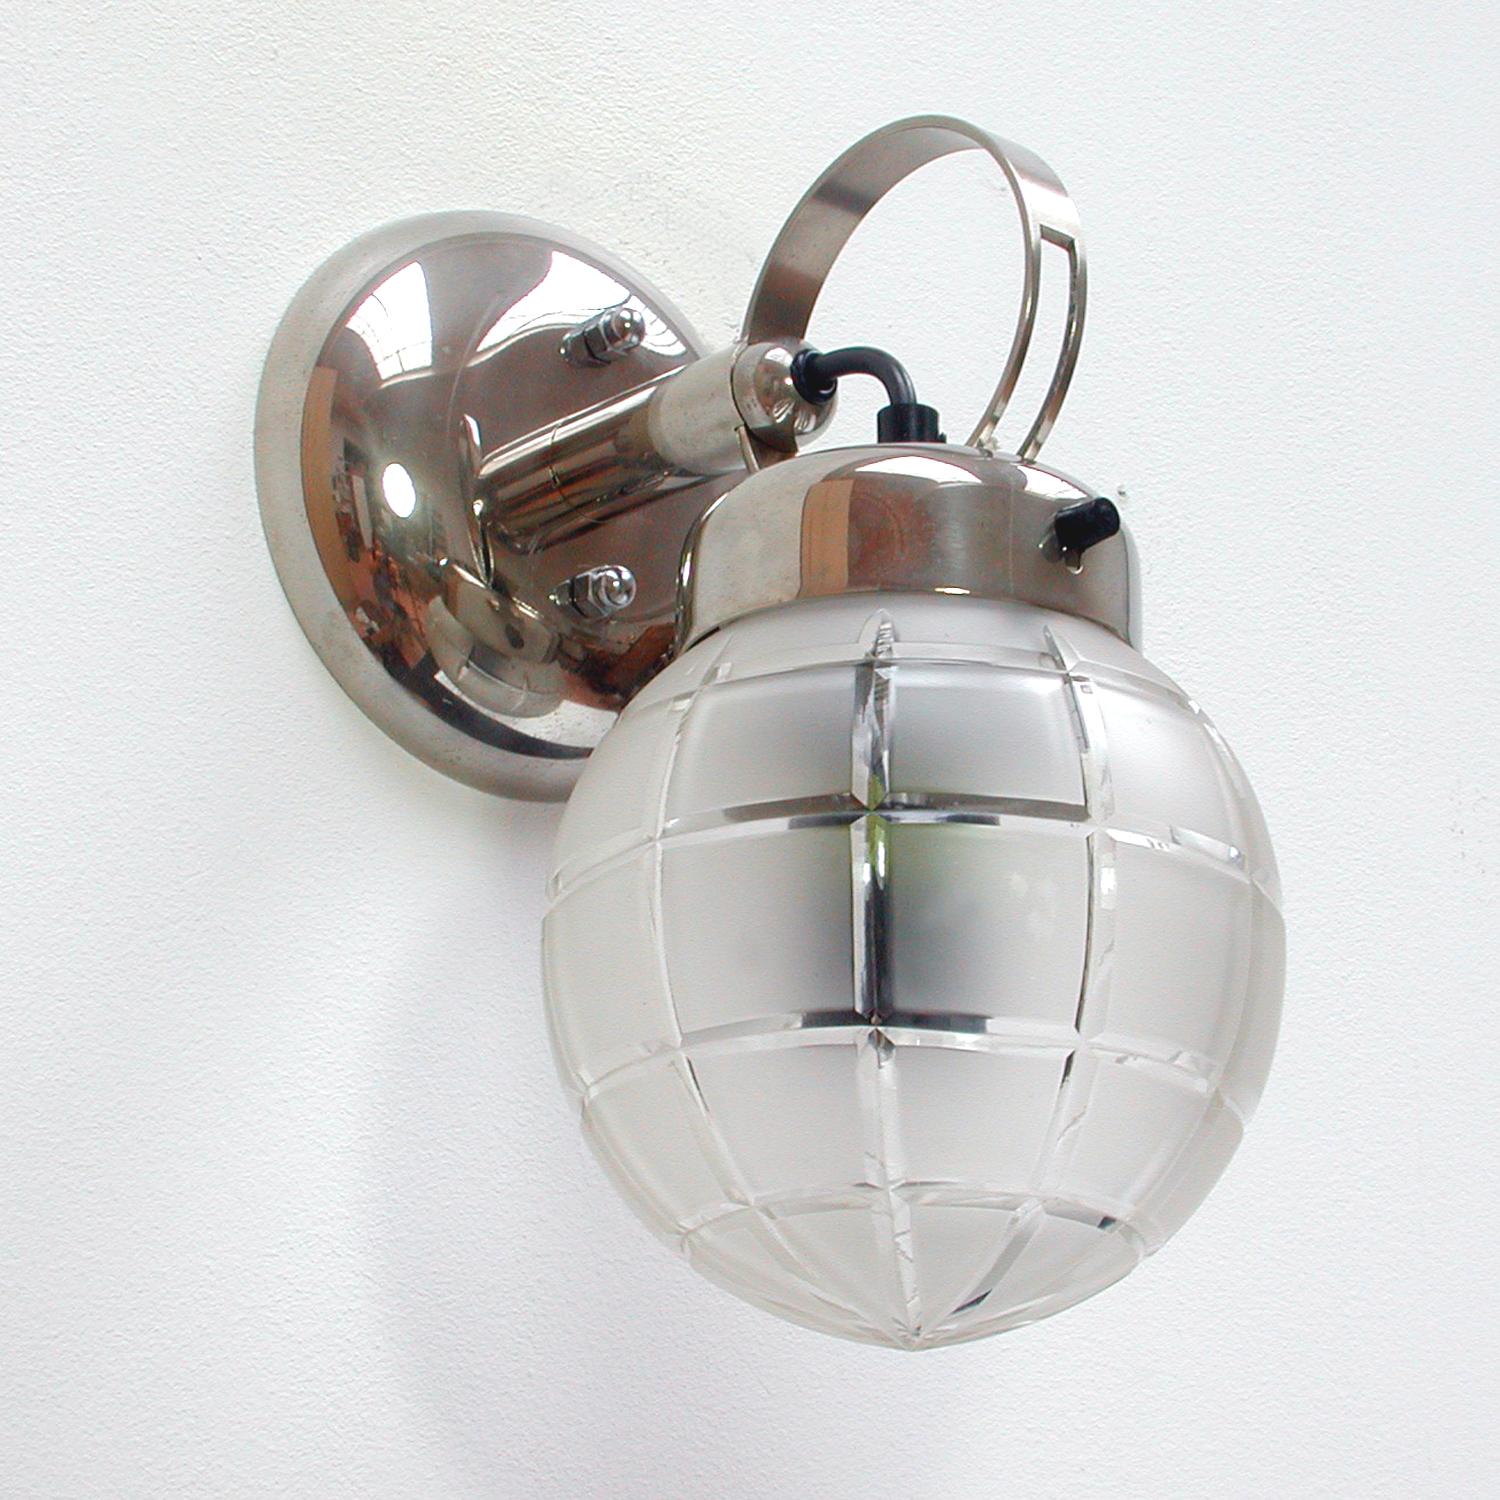 This Bauhaus inspired wall light was designed and manufactured in Germany in the 1930s. It is made of chrome and has got a geometric and partially frosted glass lamp shade. The lamp requires a E27 light bulb and has been rewired for use in any